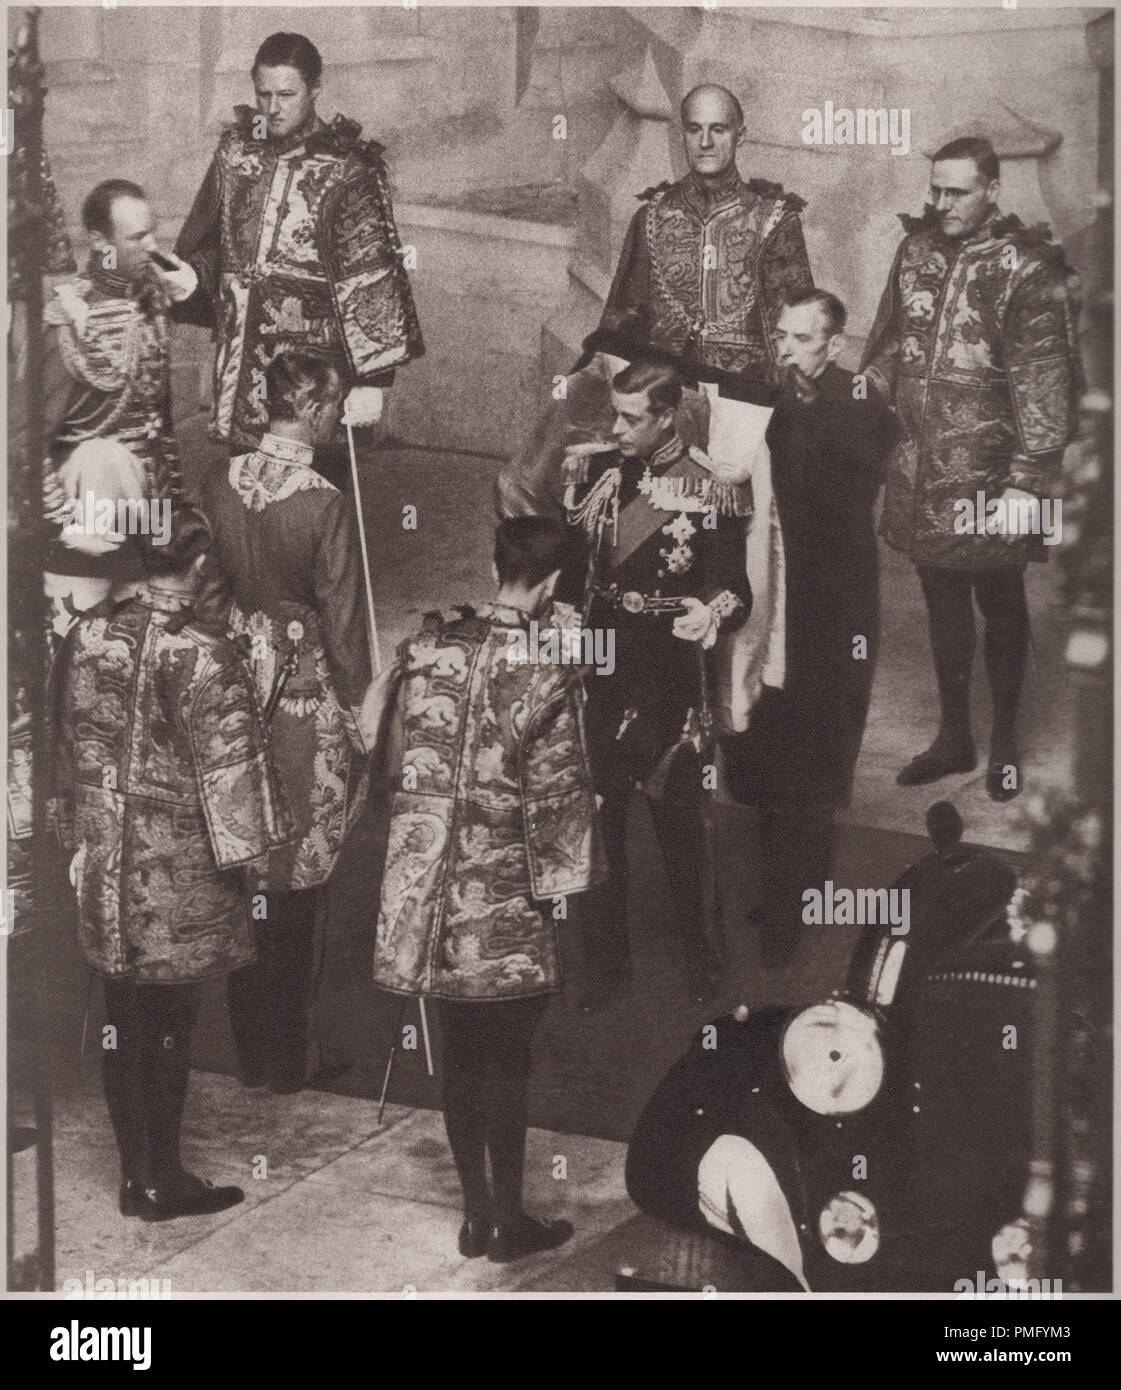 Edward the Eighth attending his first state opening of parliament on the 3rd November 1936 surrounded by heralds of the college of arms. He later abdicated the throne after seeking to marry Wallis Simpson the divorced American socialite Stock Photo